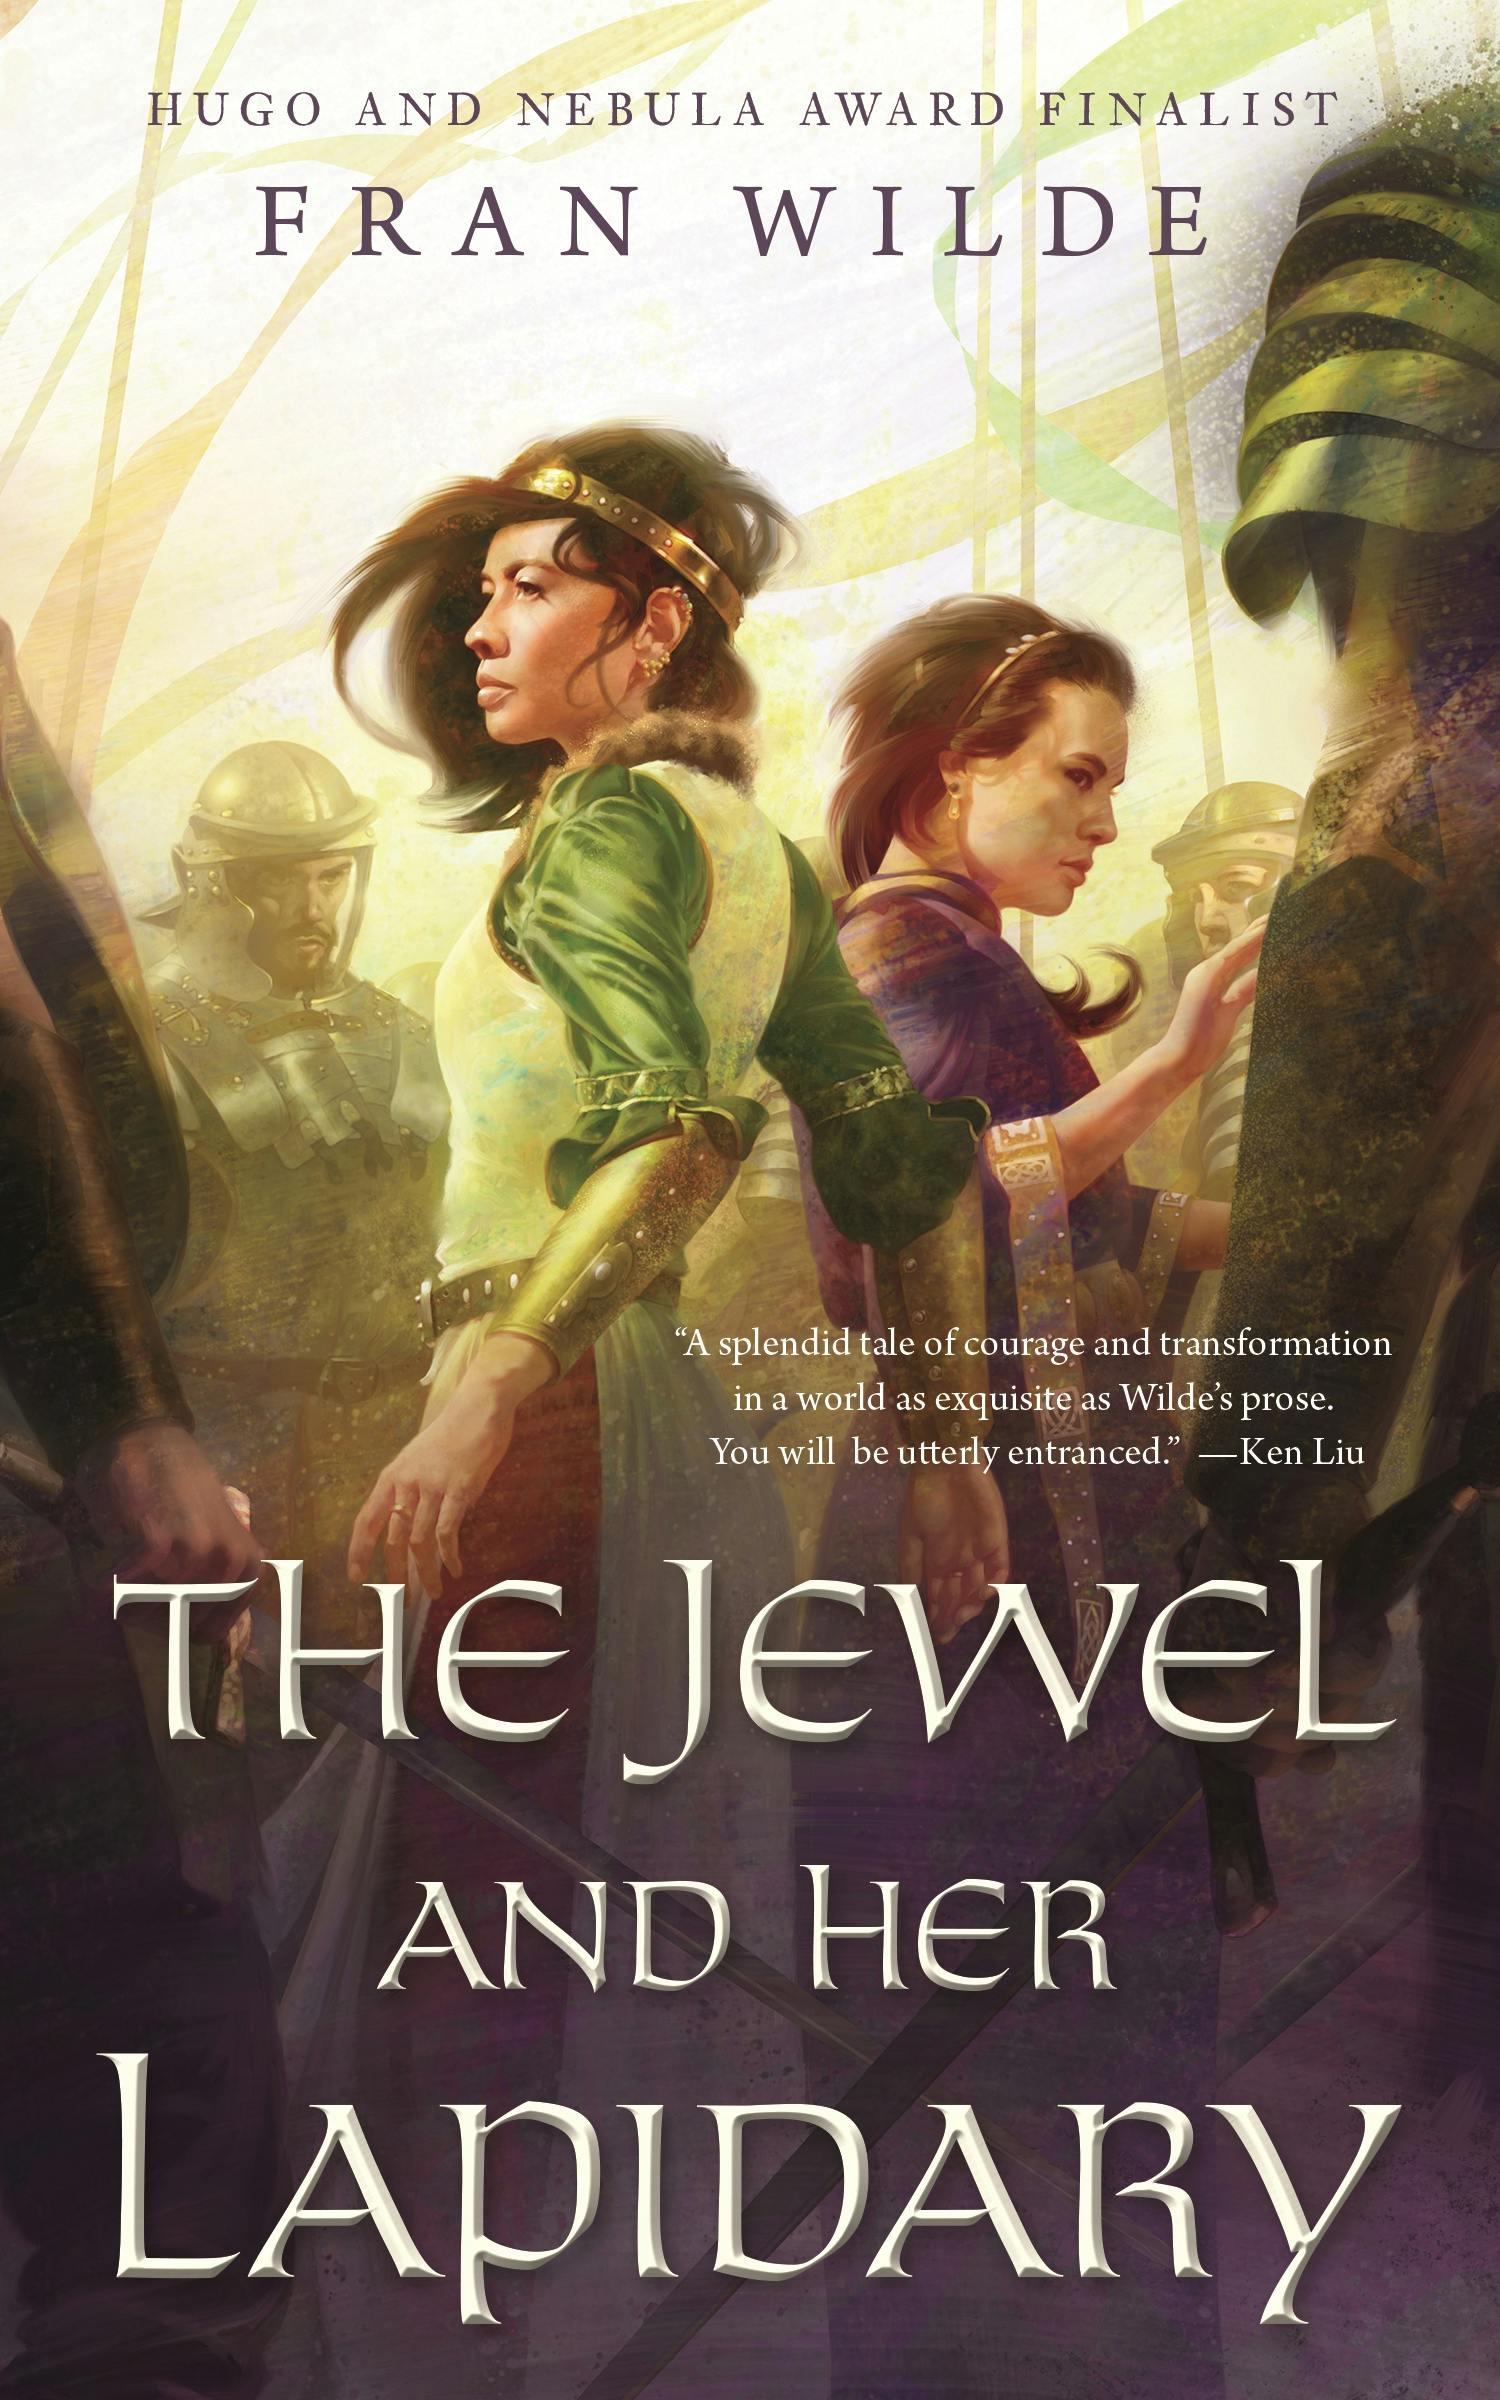 Cover for the book titled as: The Jewel and Her Lapidary